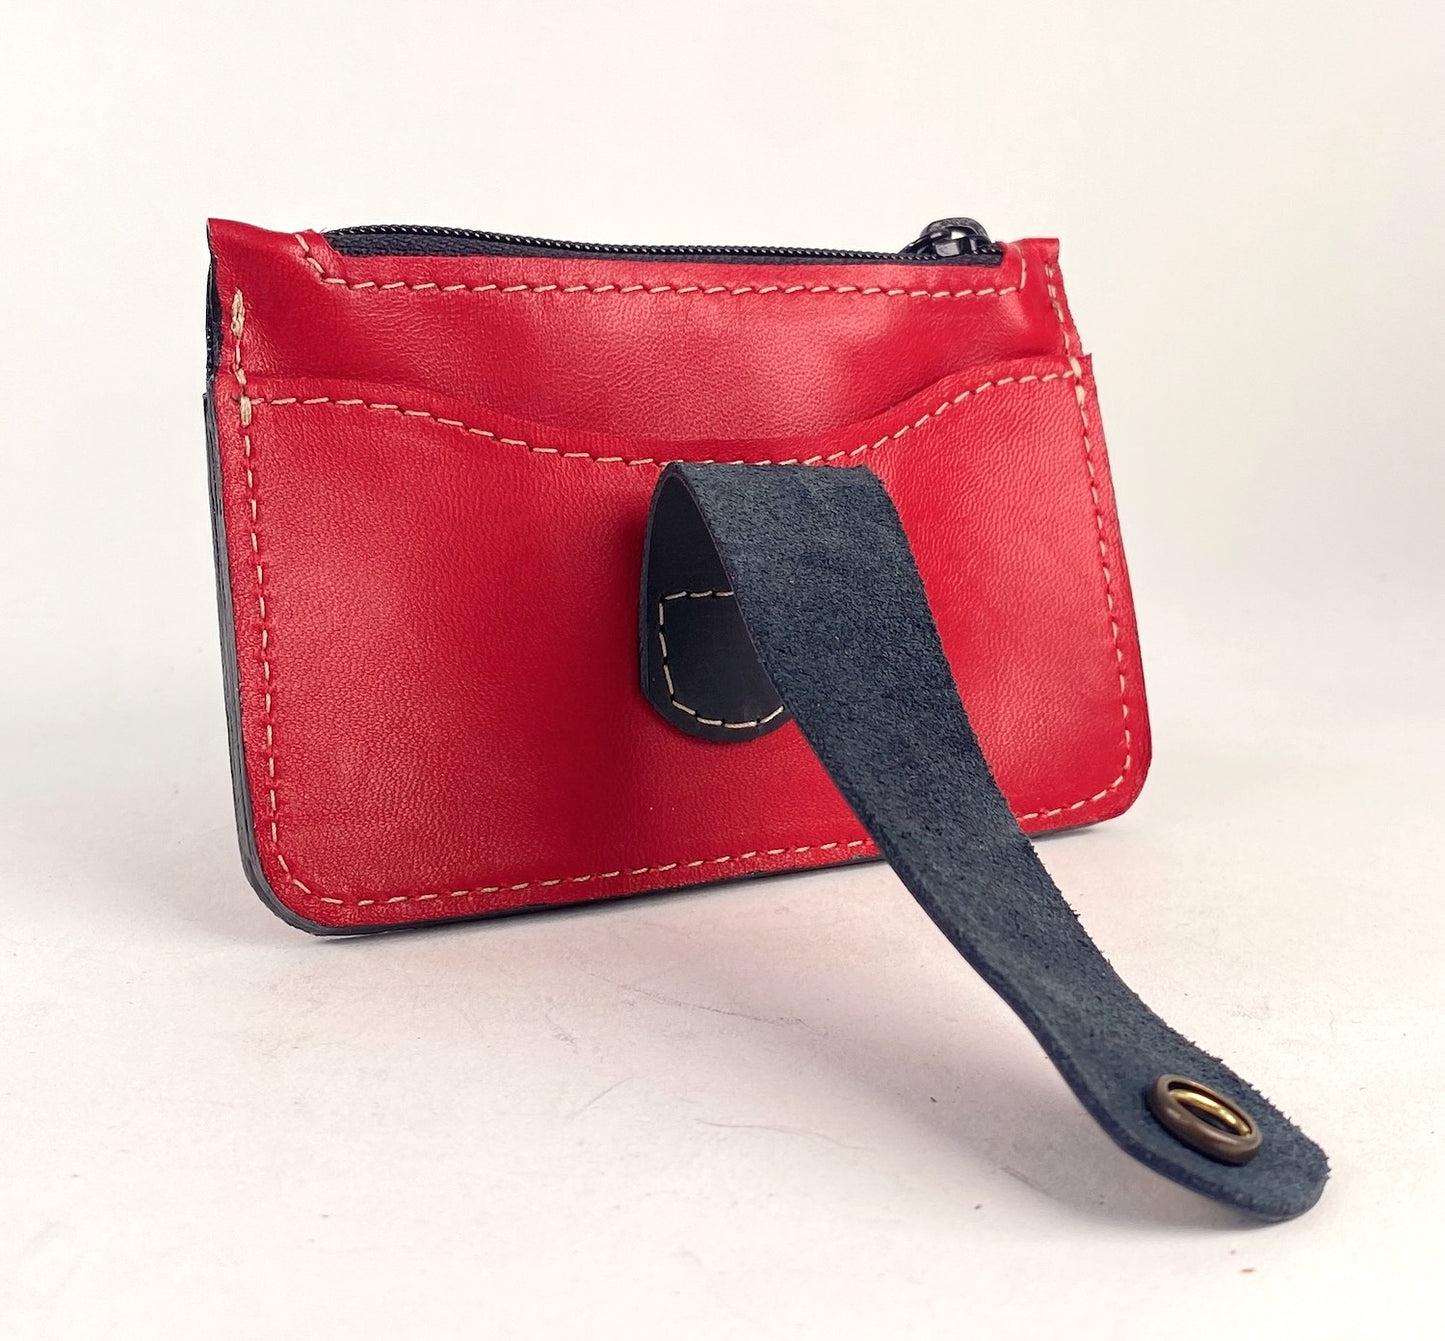 CardGuard Minimalist Leather Wallet in Red with Black